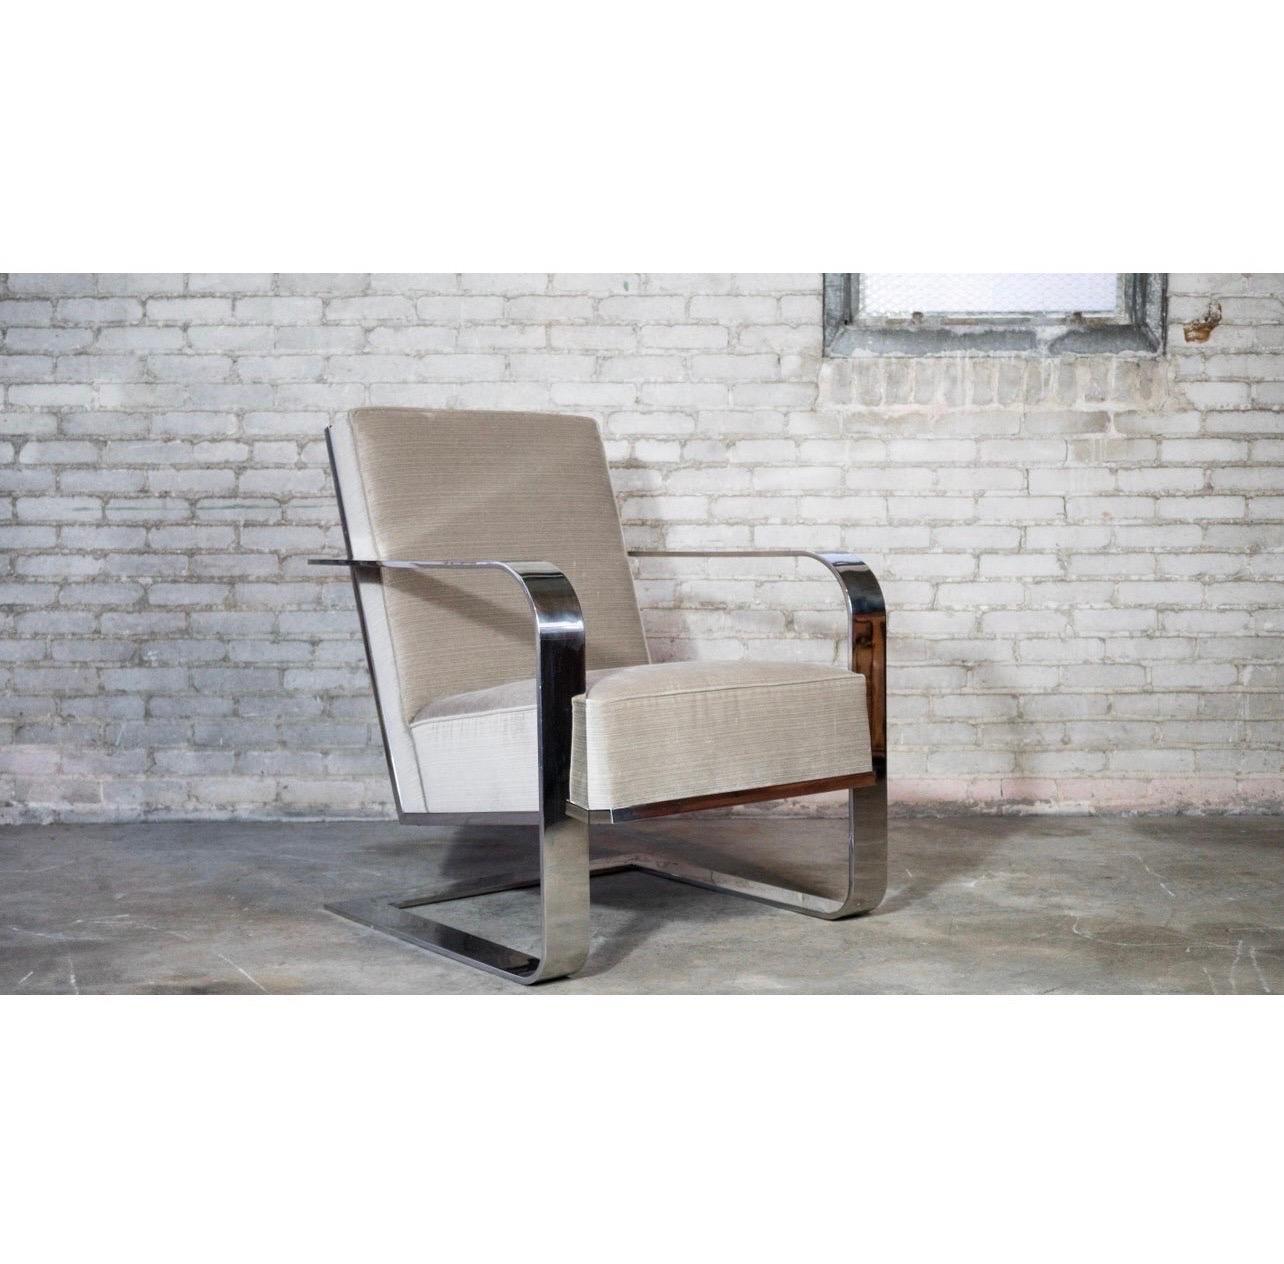 Sleek and sexy Ralph Lauren chrome lounge chair upholstered in a luxurious beige mohair fabric. Impressive large presence balanced with reflective attributes and the aforementioned neutral color. The coveted chrome flat bar frame features oversized